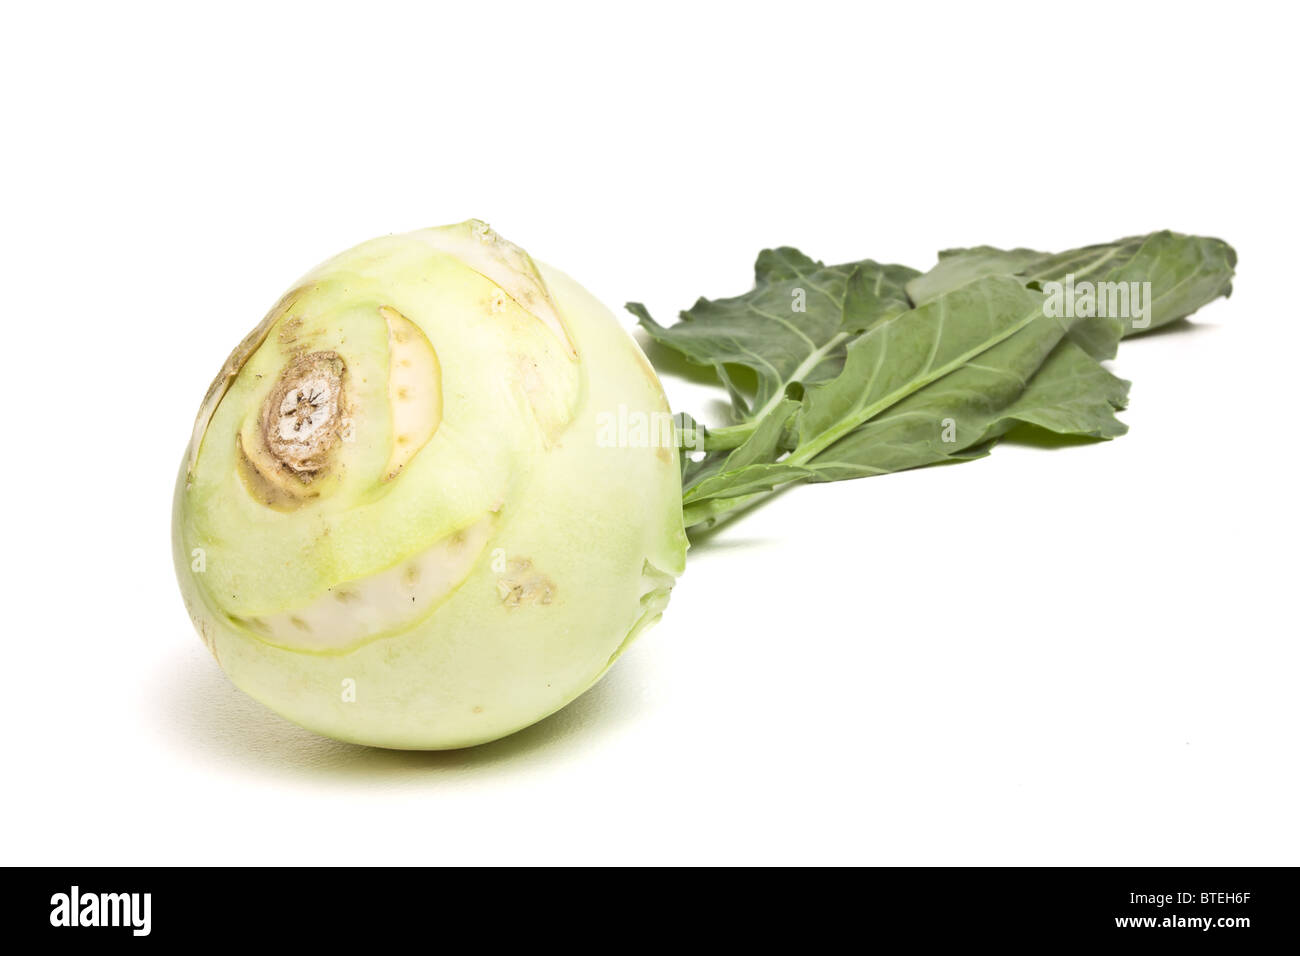 German Turnip with leaf from low perspective isolated on white. Stock Photo